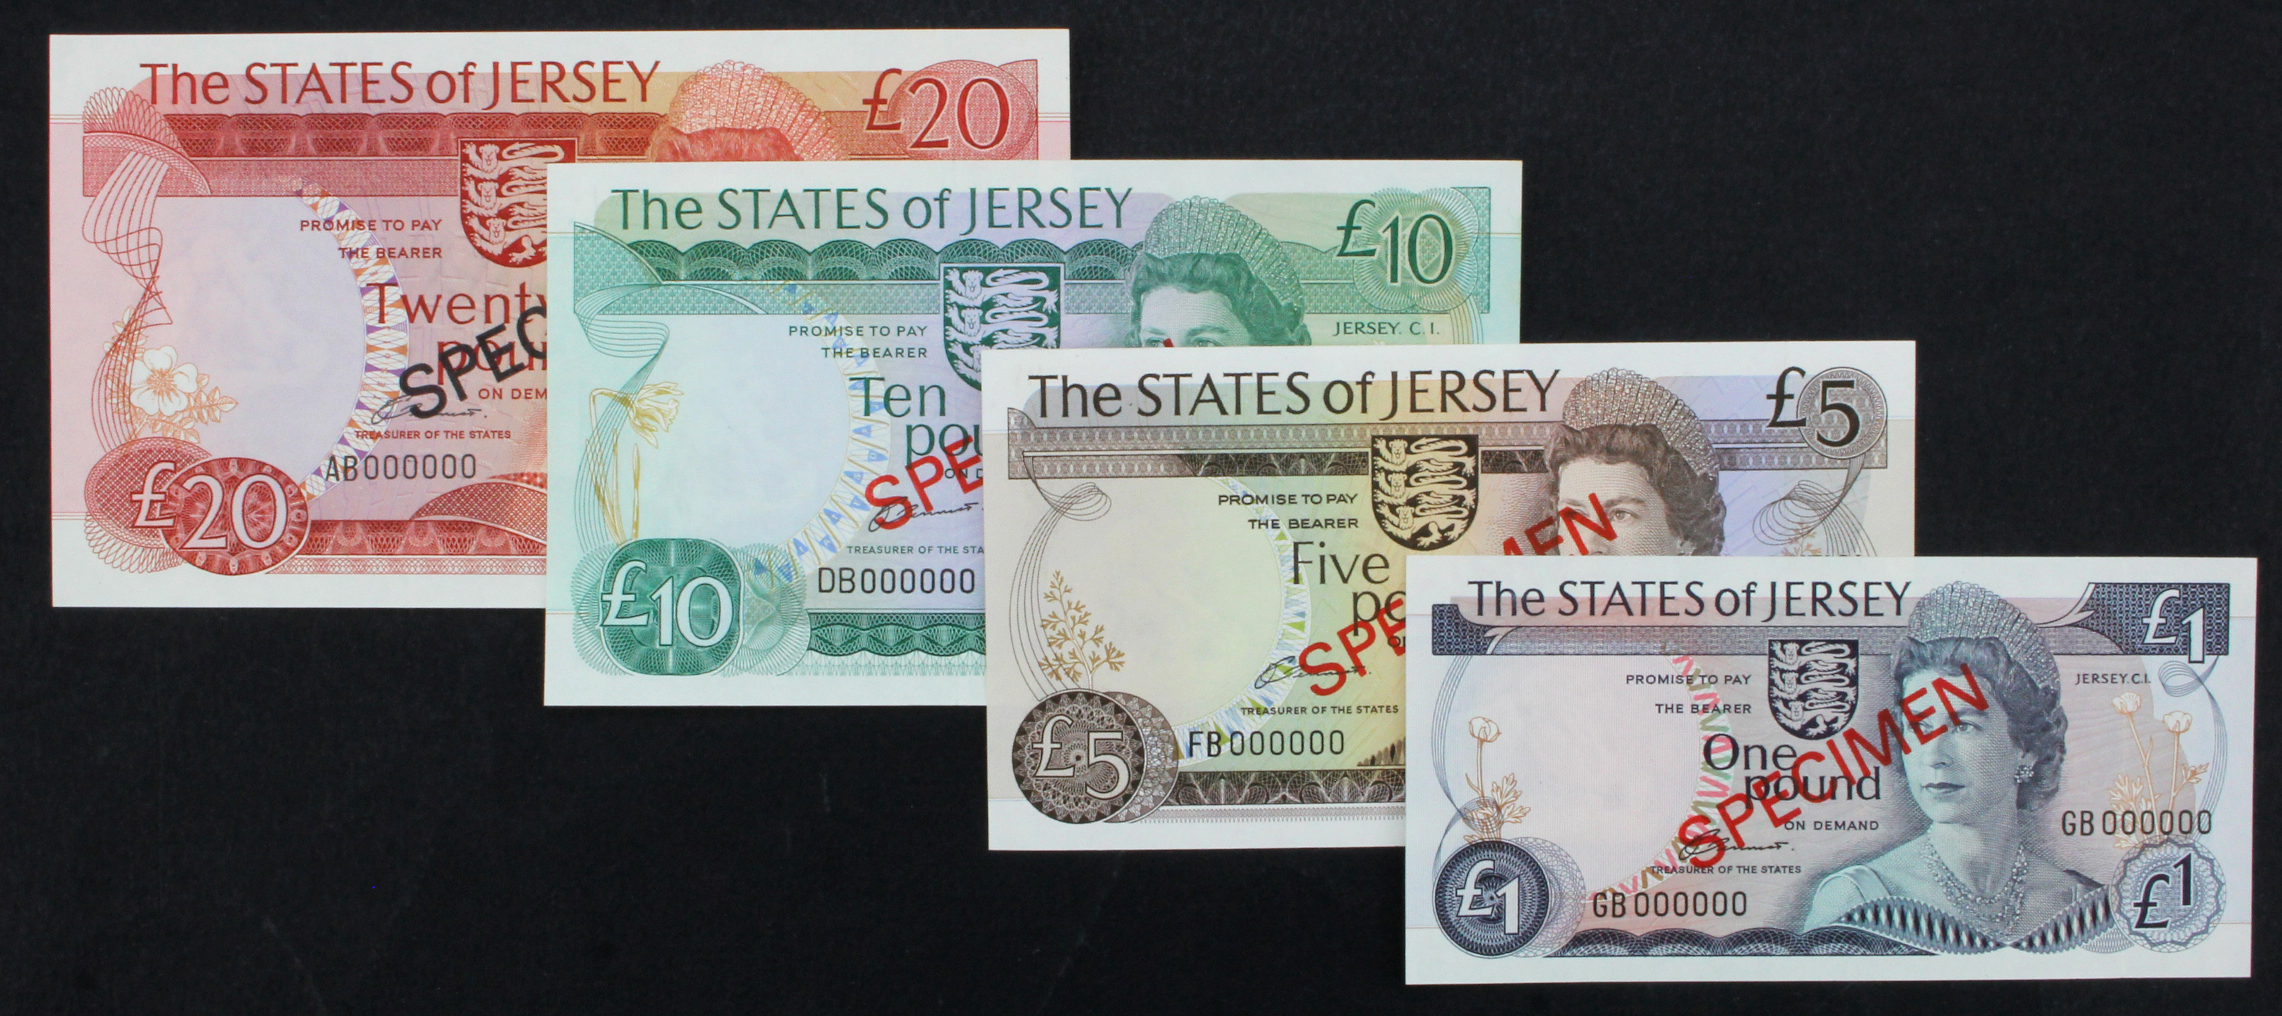 Jersey (4), a set of SPECIMEN notes, 20 Pounds, 10 Pounds, 5 Pounds and 1 Pound issued 1976 signed - Image 2 of 2